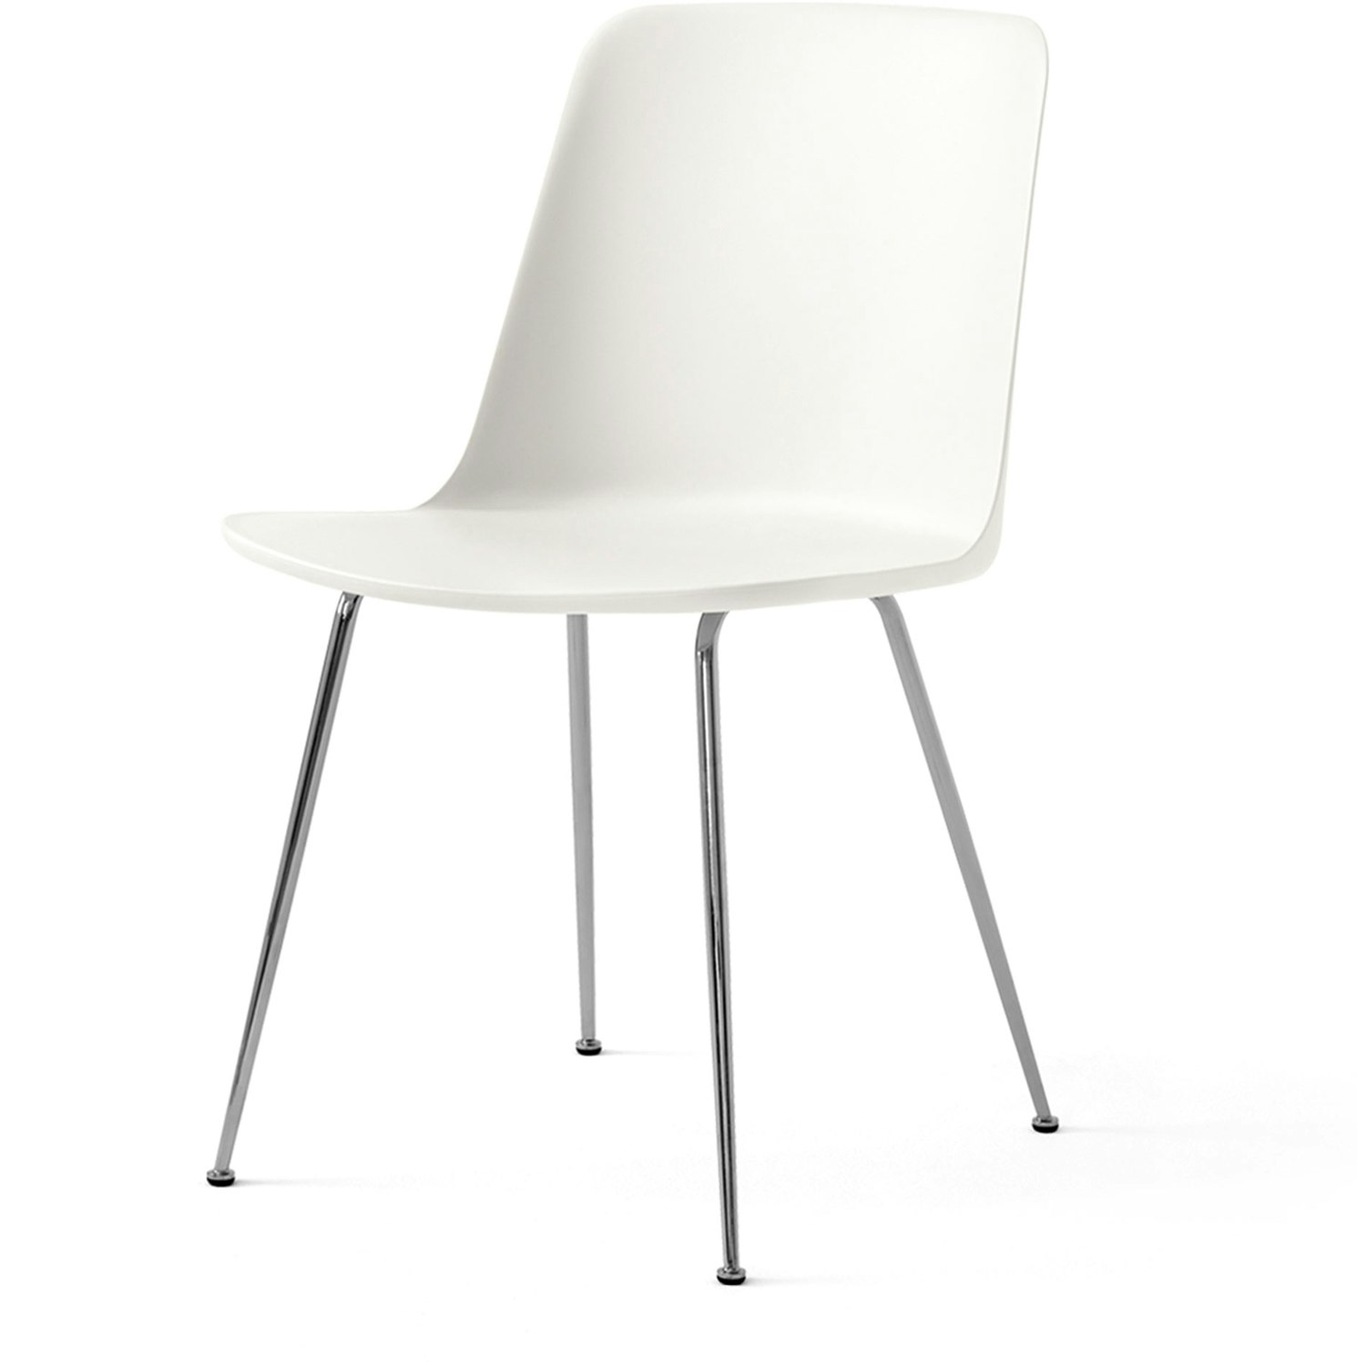 Rely Chair HW6, Chrome / White